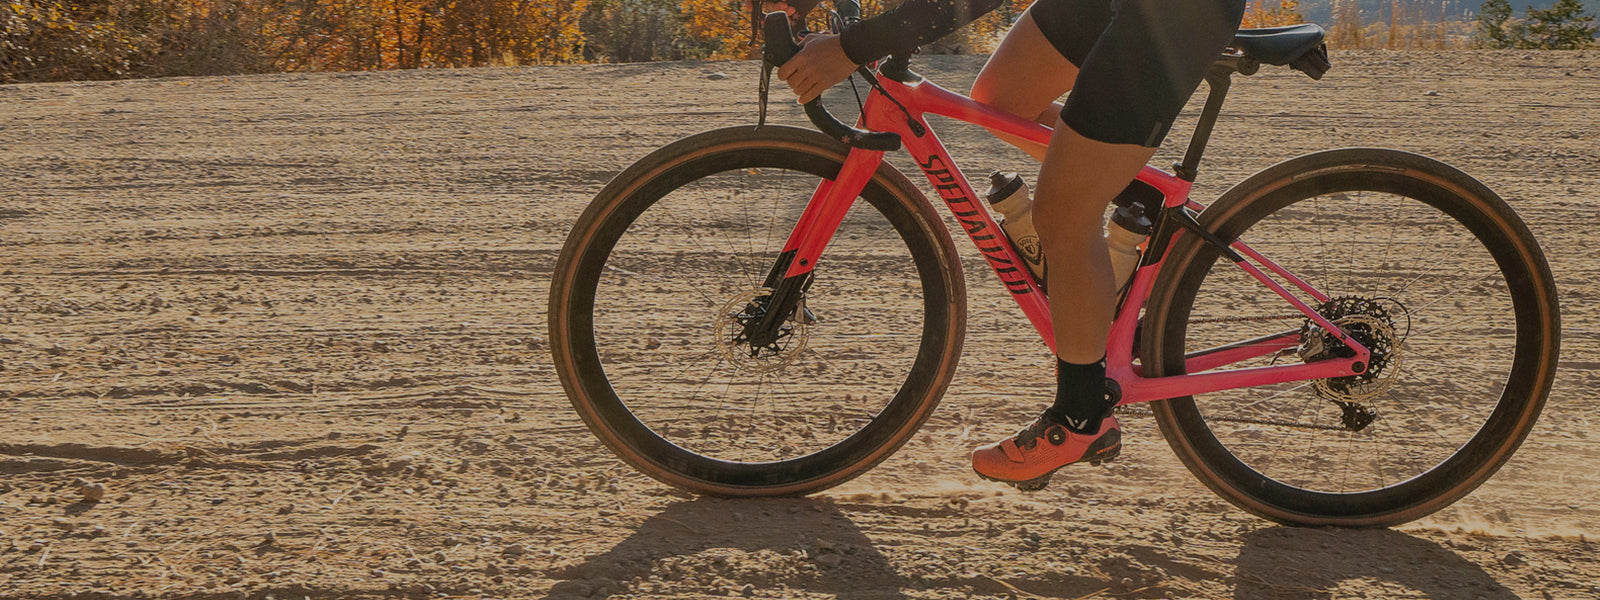 Swiftwick PERFORMANCE Socks header image, person cycling wearing PERFORMANCE Four socks